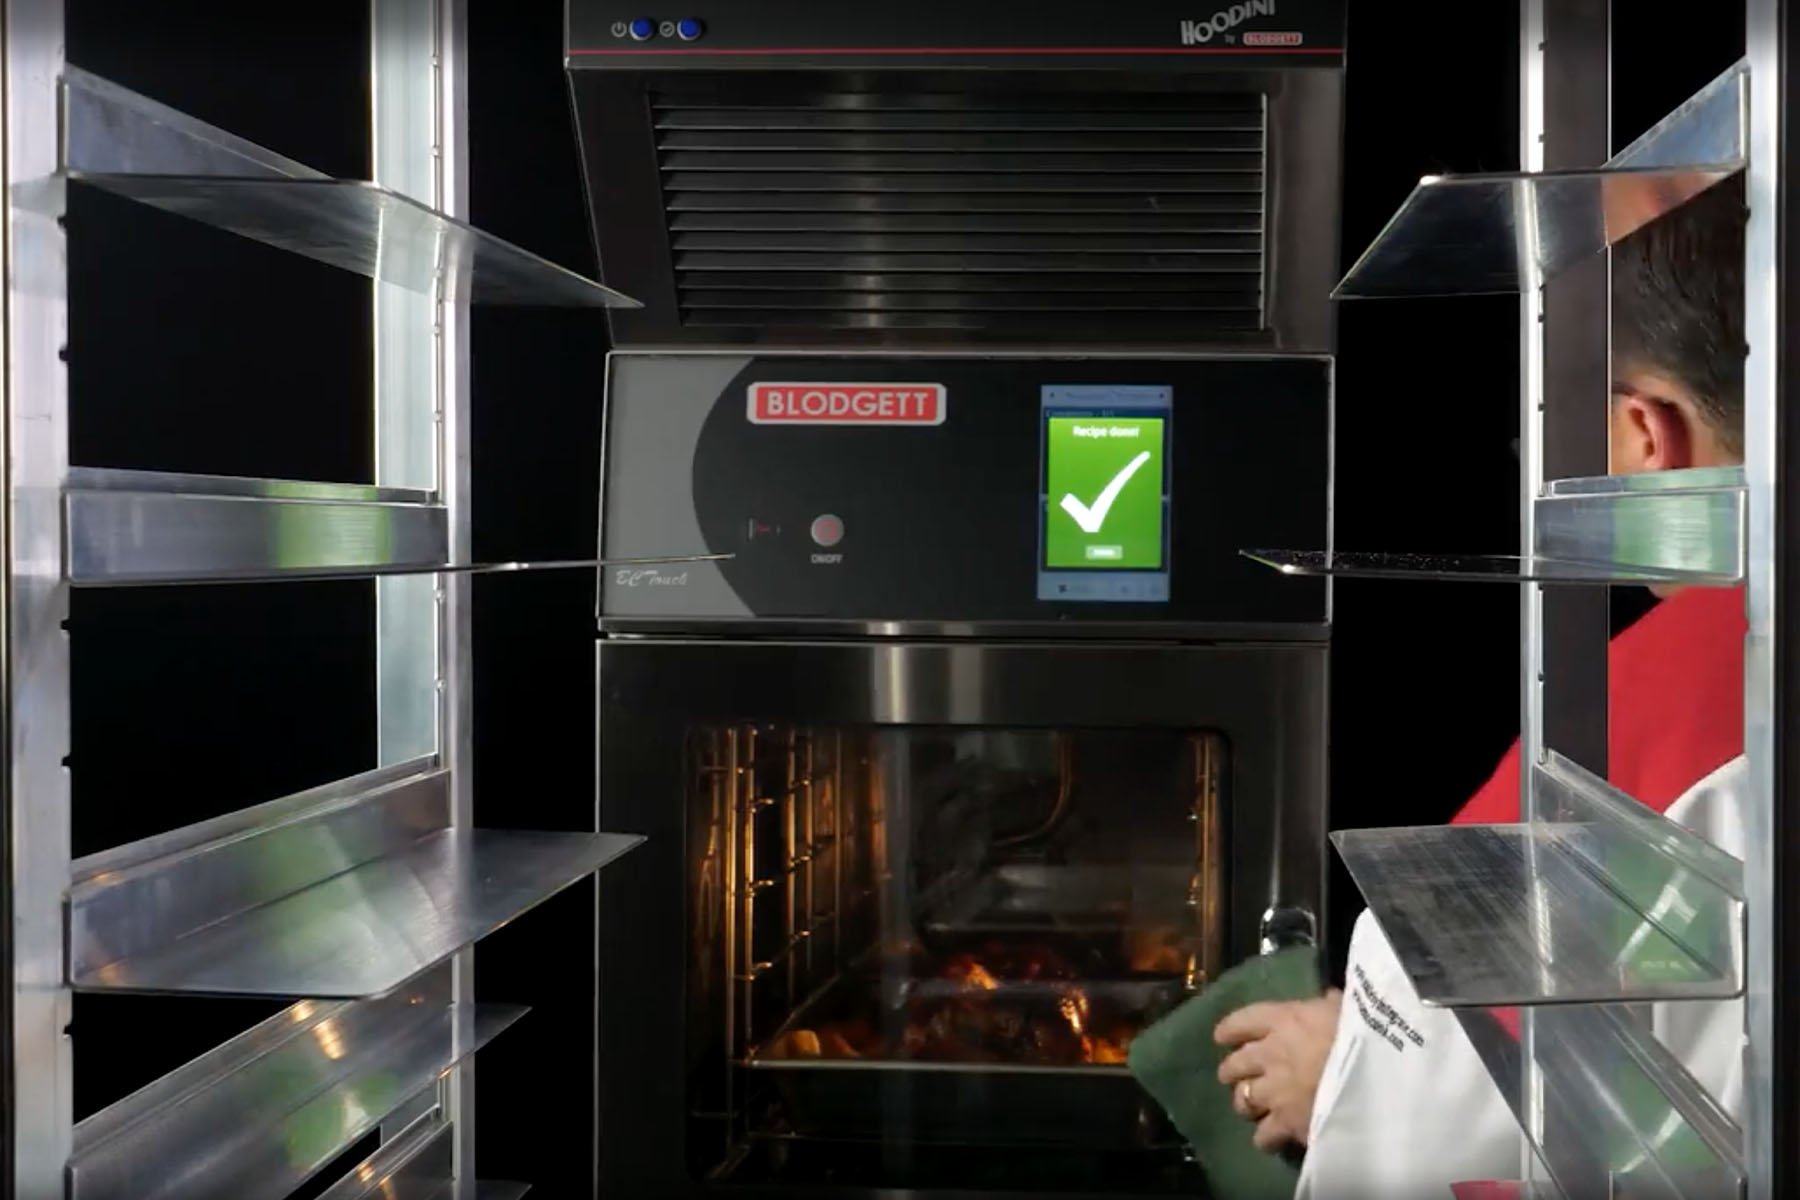 Interior of commercial combi oven with chef opening the oven door